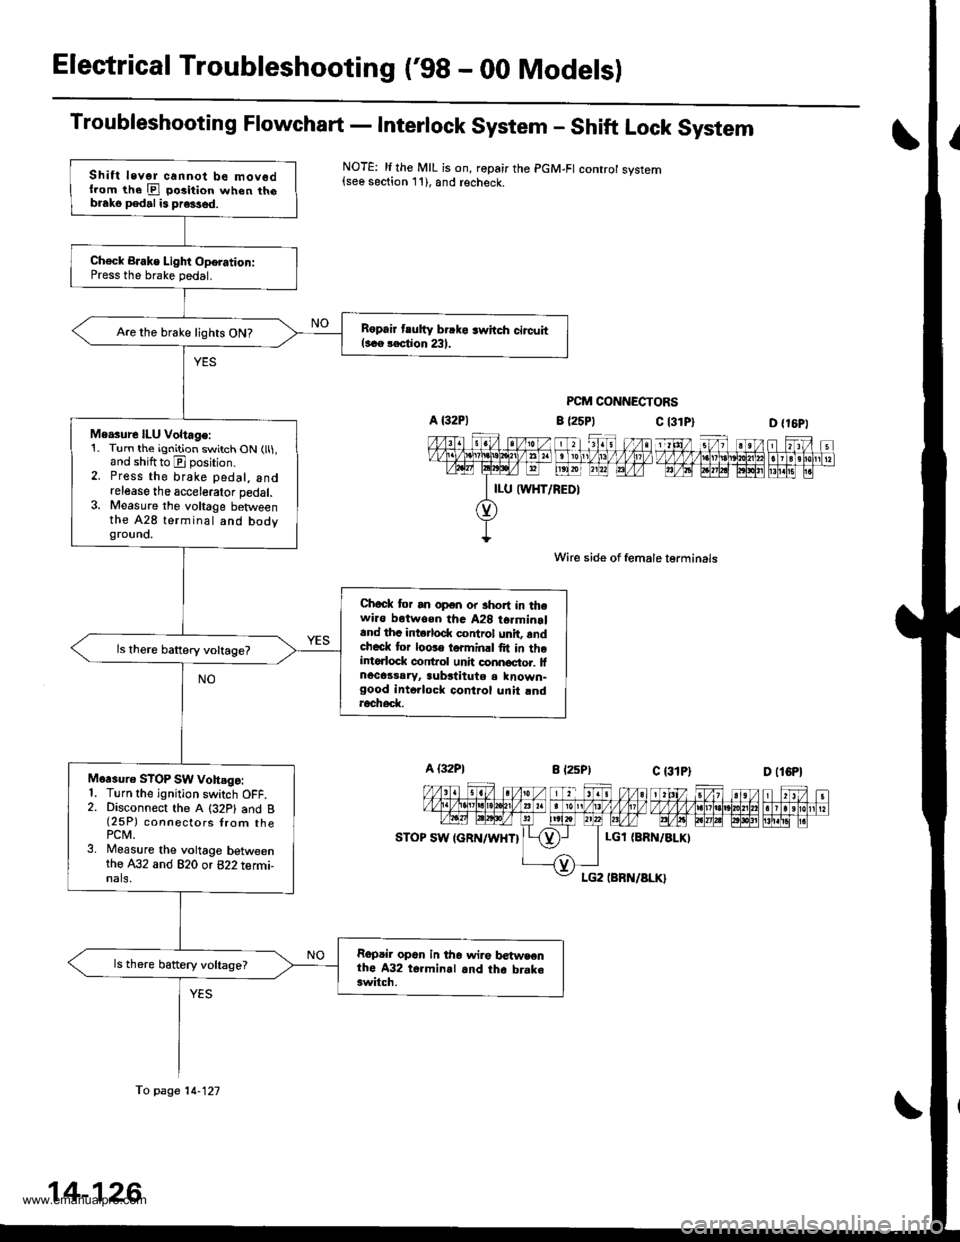 HONDA CR-V 2000 RD1-RD3 / 1.G Owners Manual 
Electrical Troubleshooting (98 - 00 Modelsl
Troubleshooting Flowchart - Interlock System - Shift Lock System
NOTE: li the MIL is on, ropair the PGM-FI controt system{see section 11), and recheck.
PC